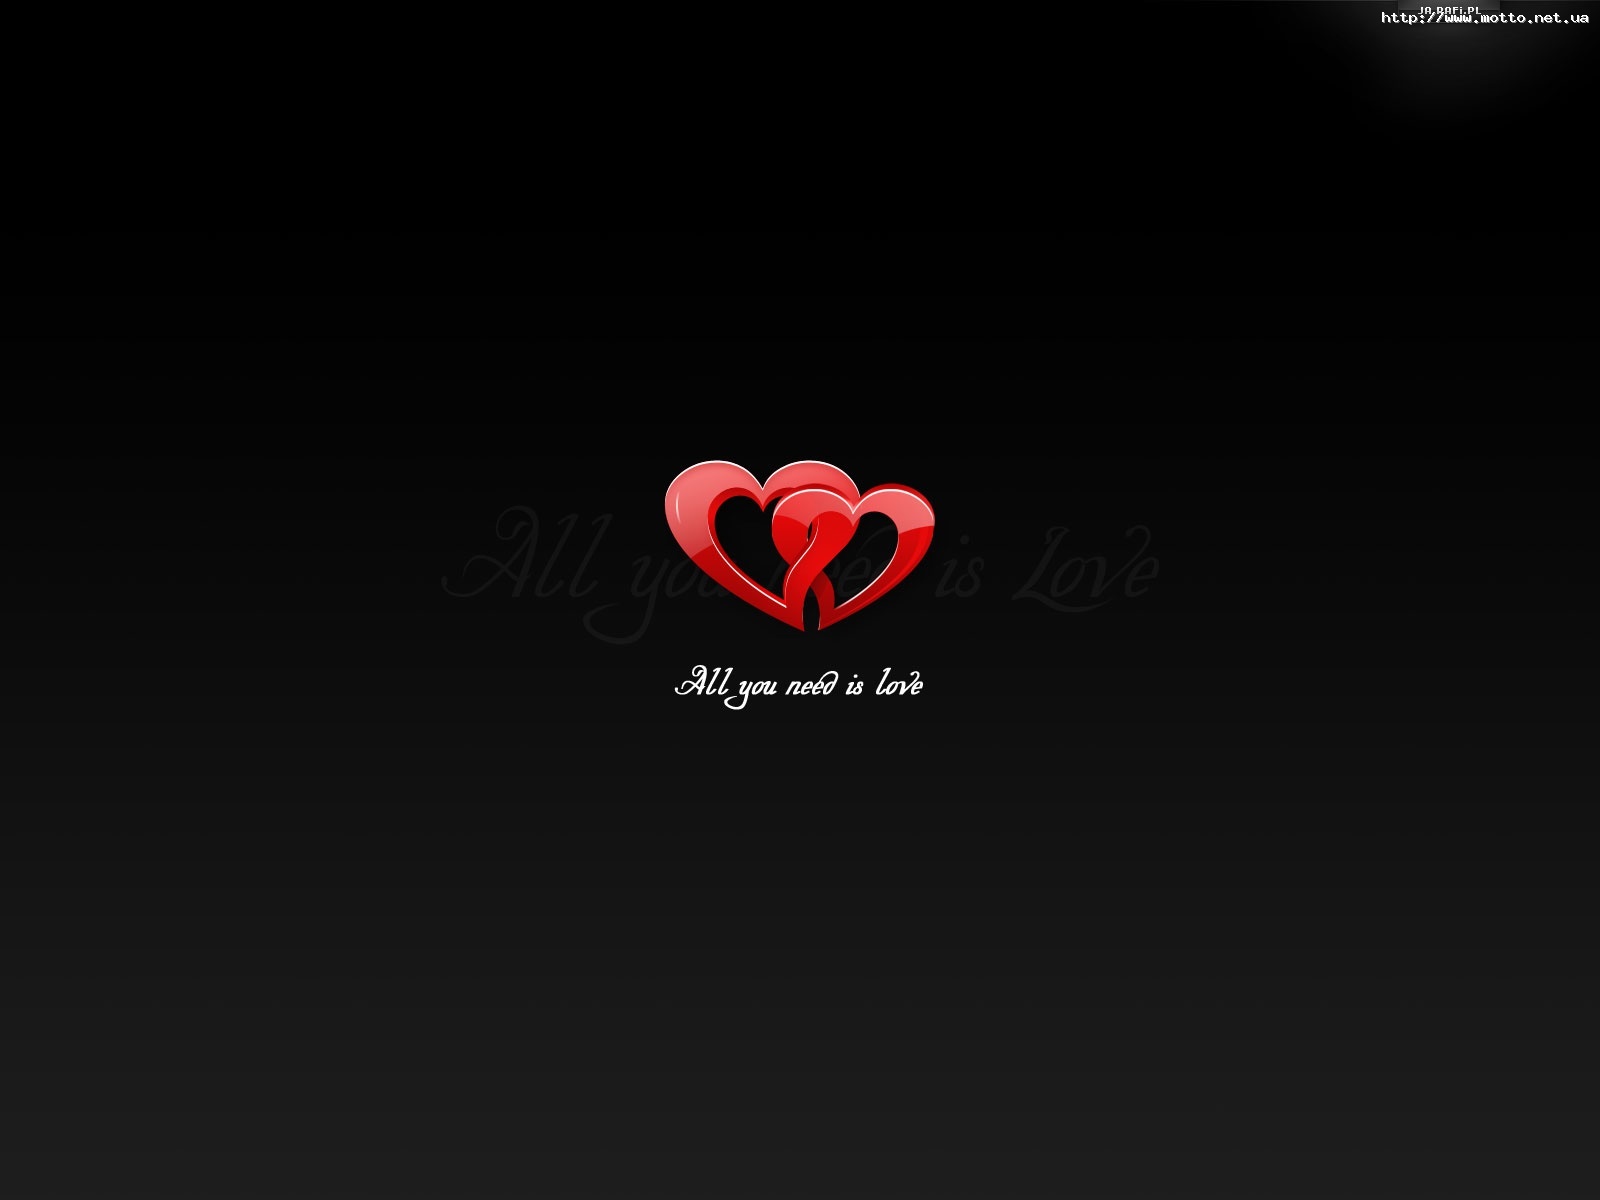 hearts, background, black, love, holidays, valentine's day Aesthetic wallpaper